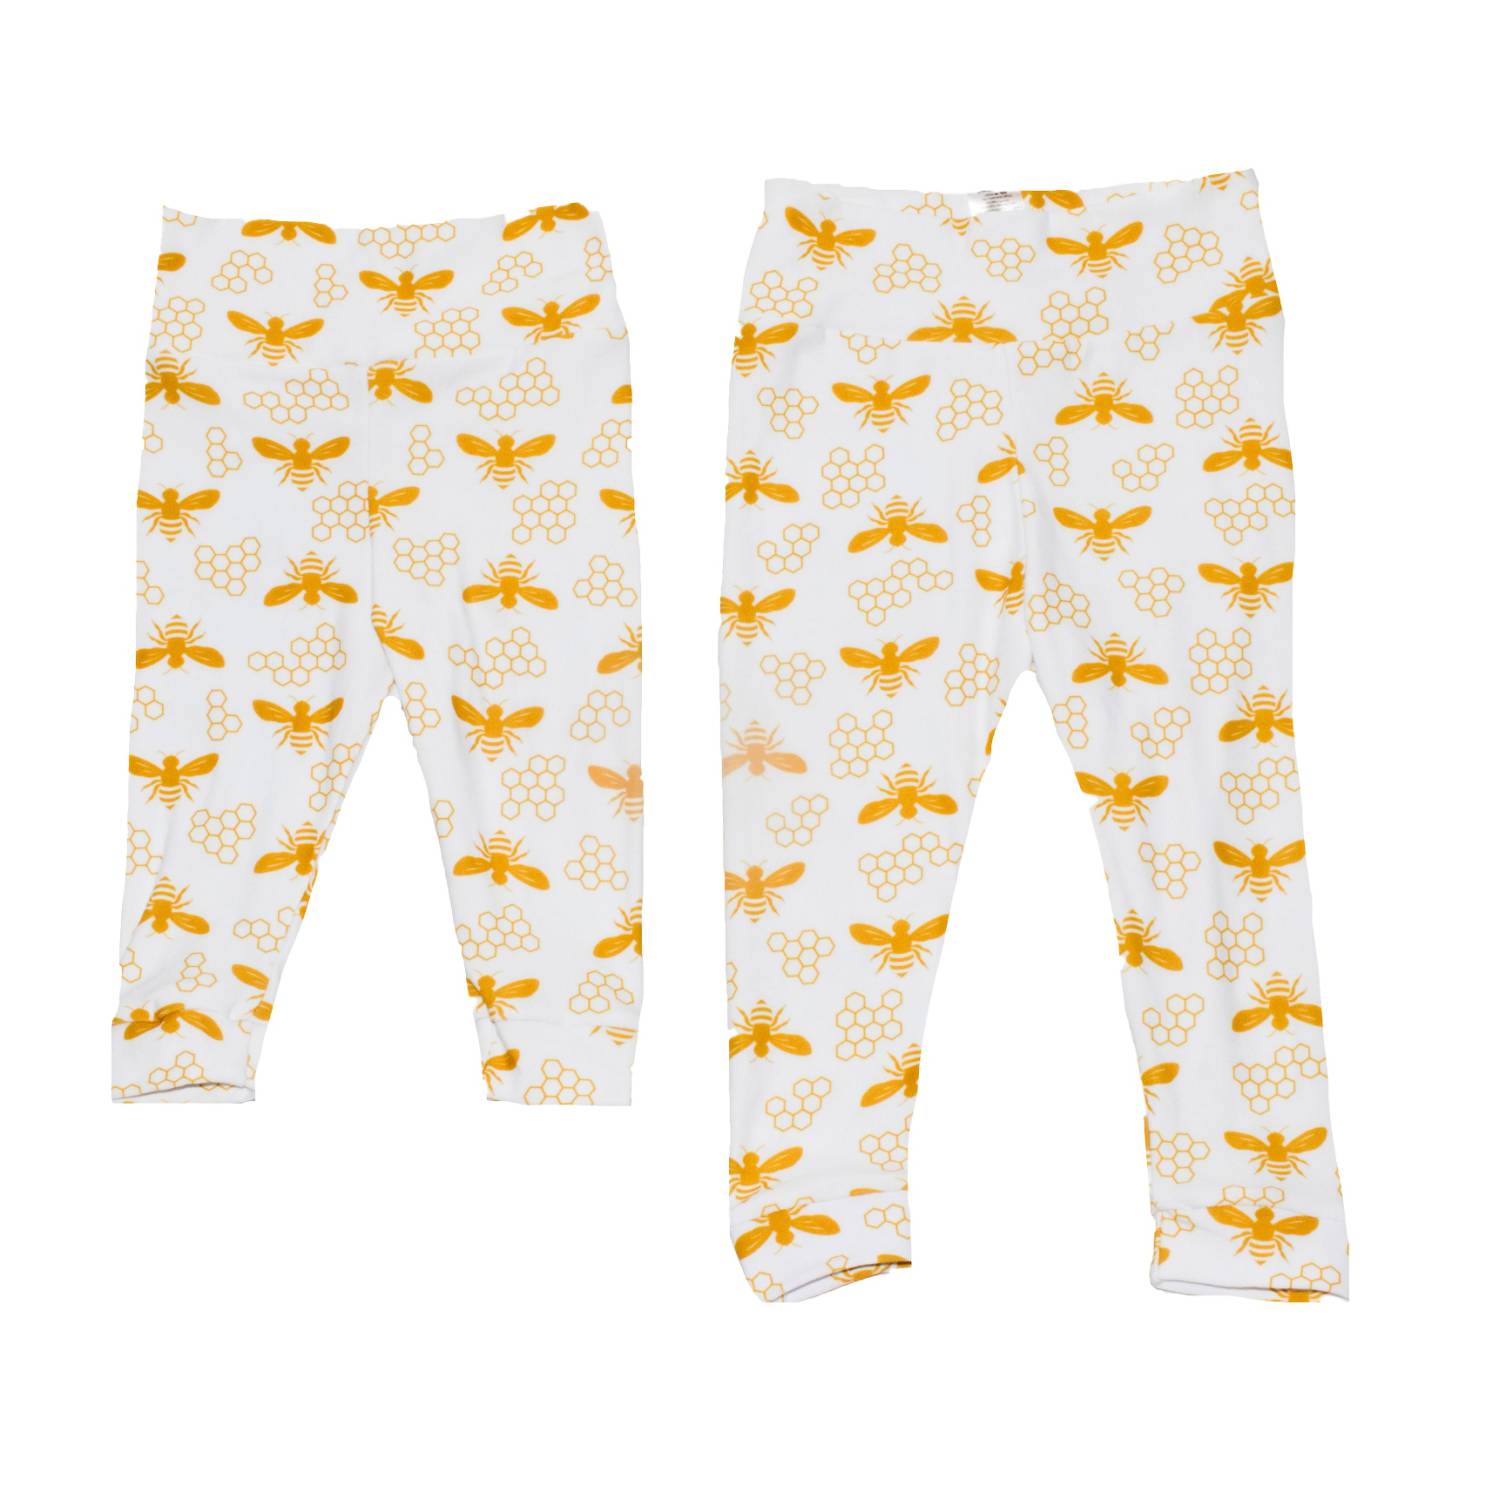 Bumblito Leggings Pattern: Bee Yourself / Size: XL (110 - 116)